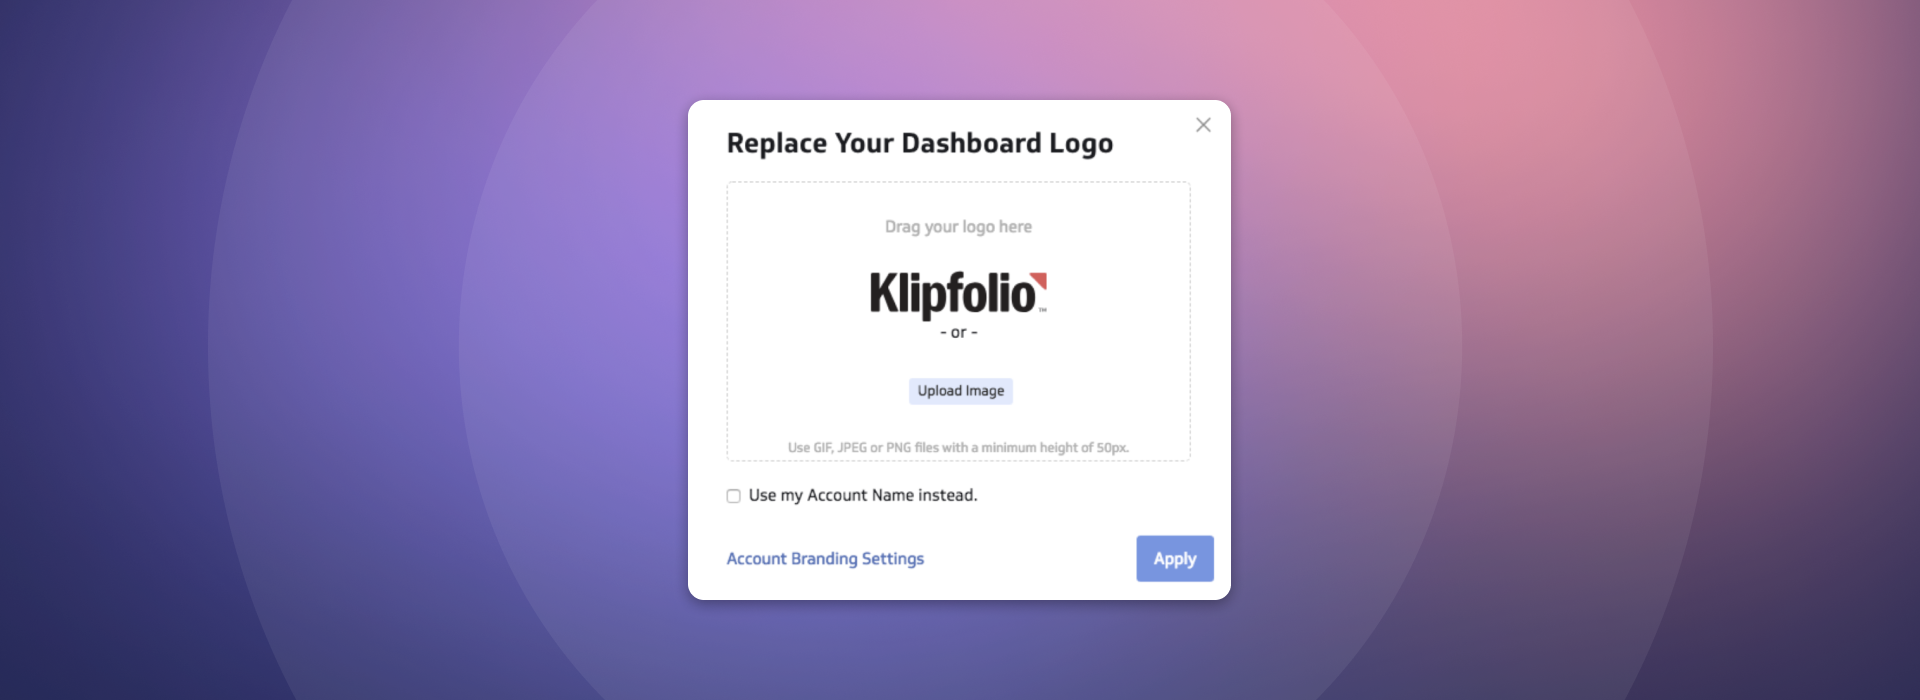 Replace Your Dashboard Logo